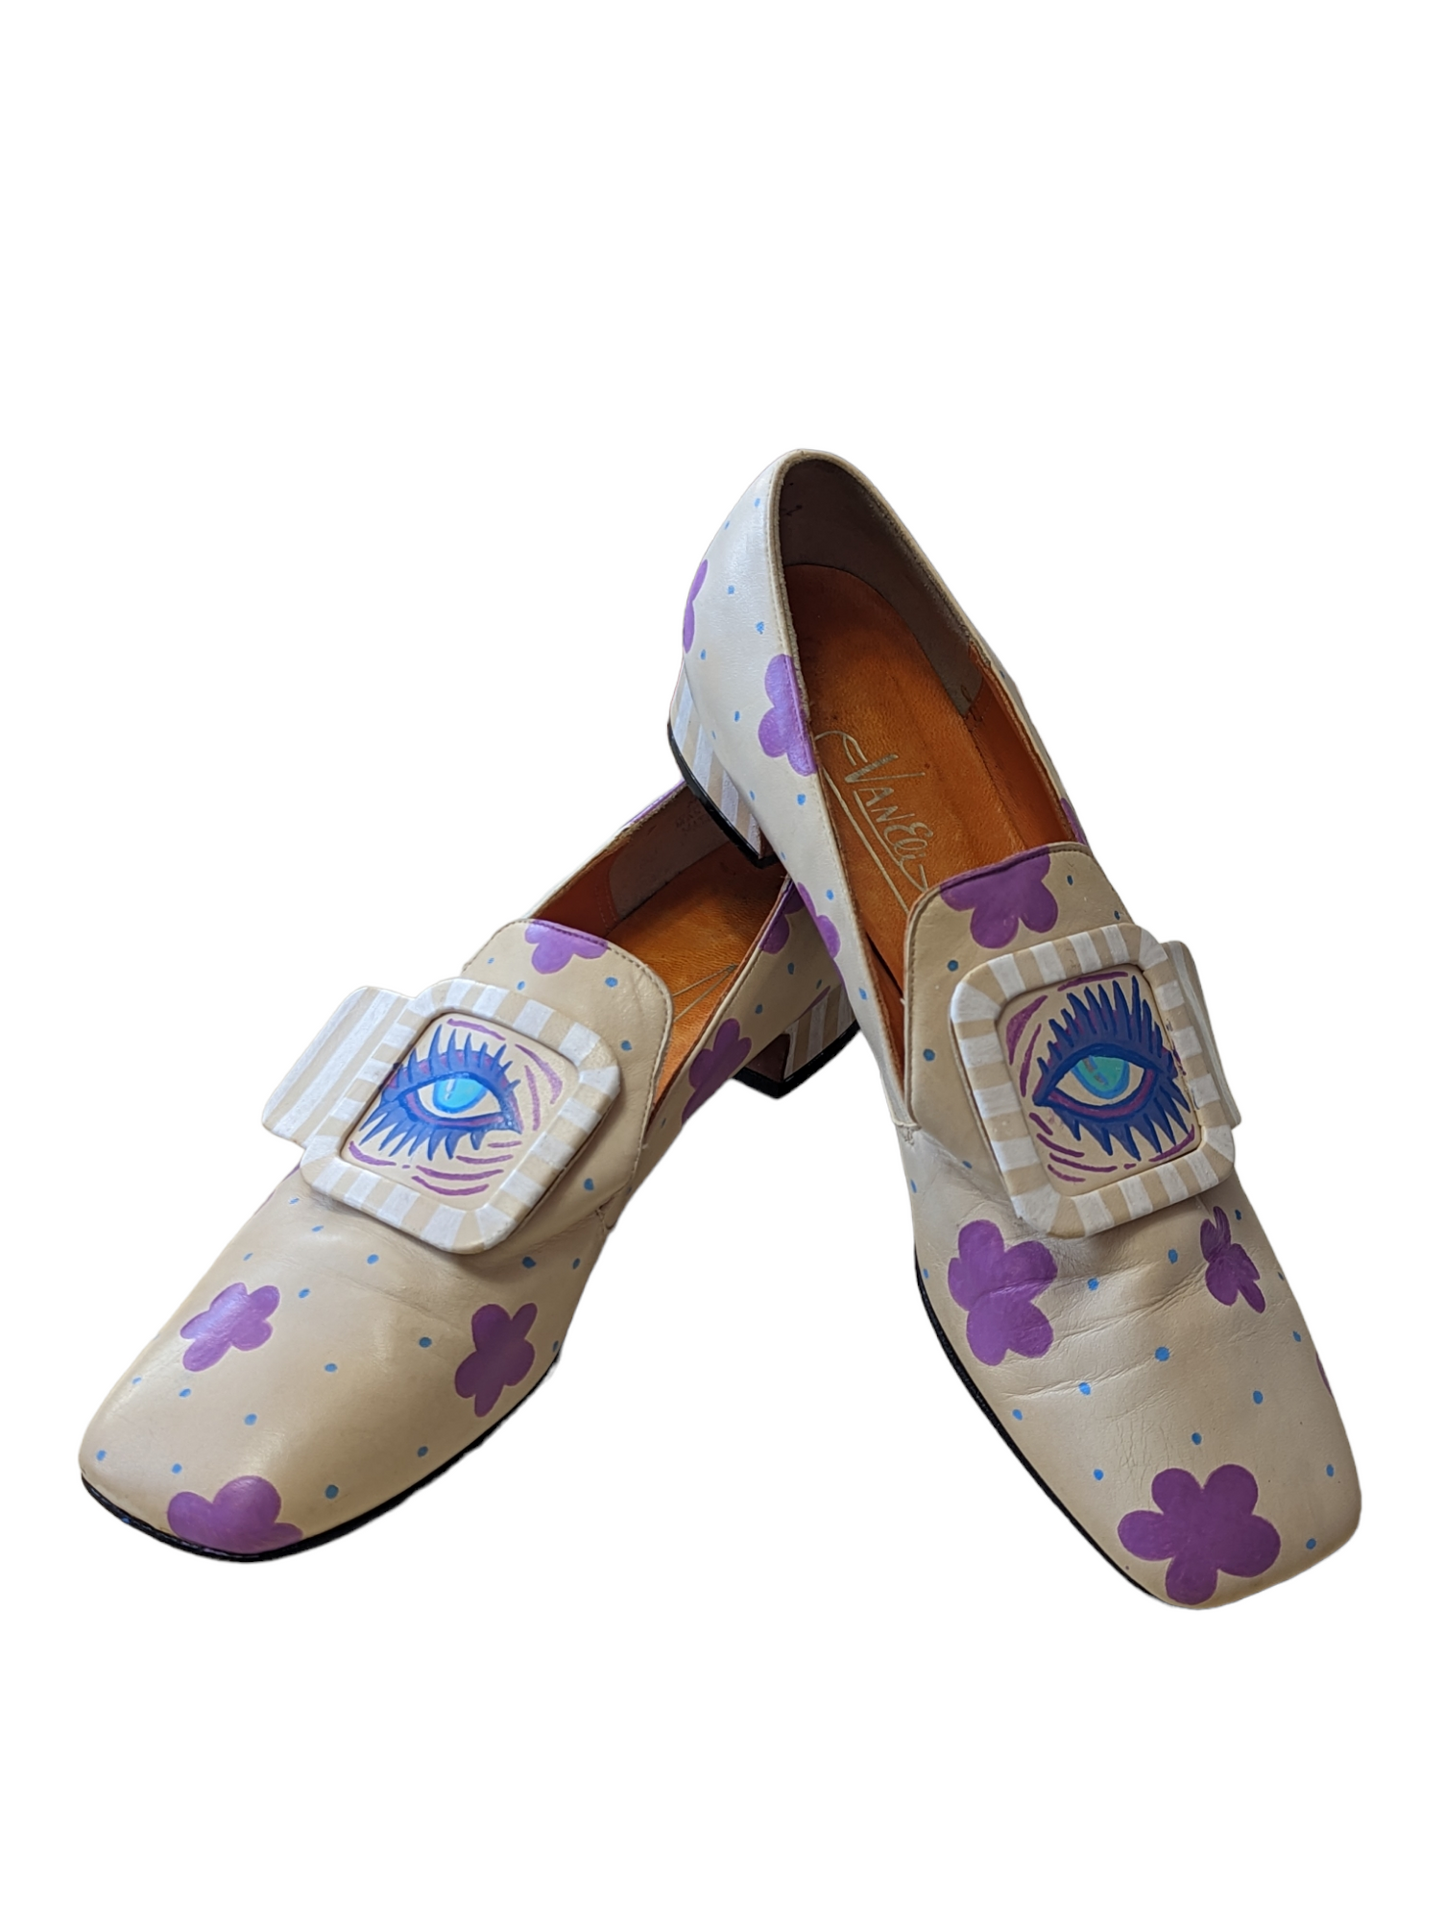 Groovy Eyes Hand Painted Shoes by Becky Bacsik